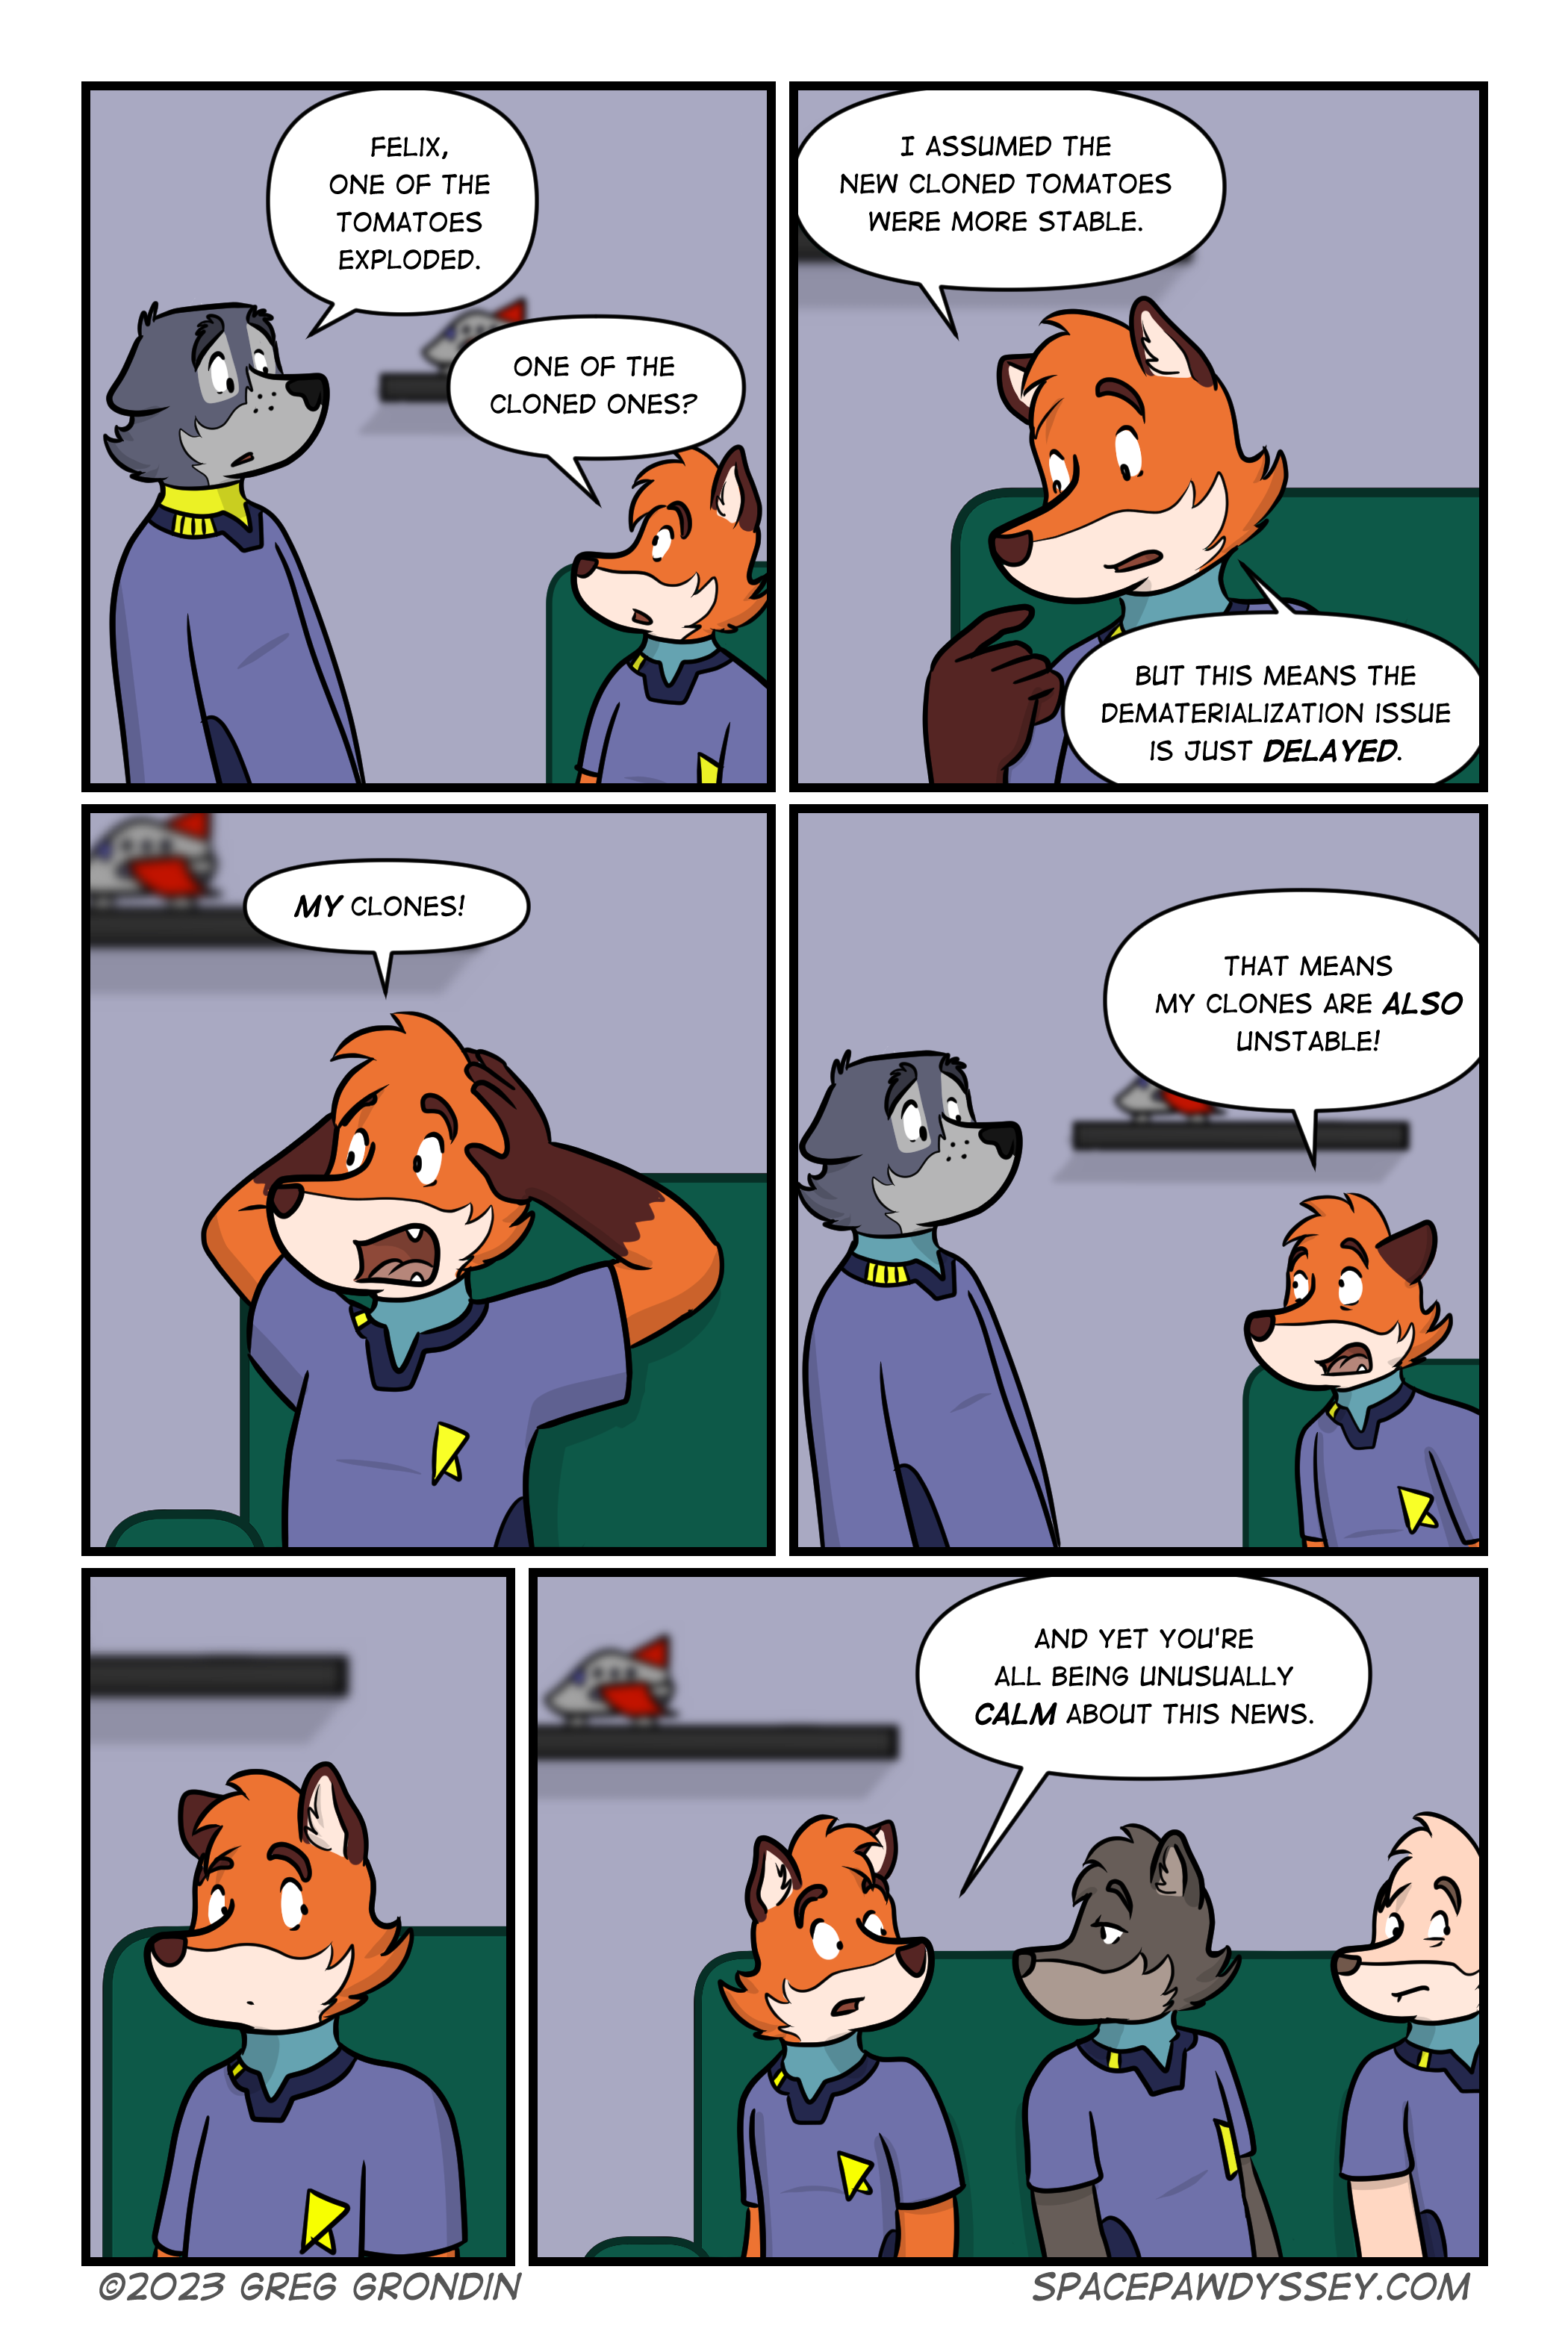 Space Pawdyssey #629